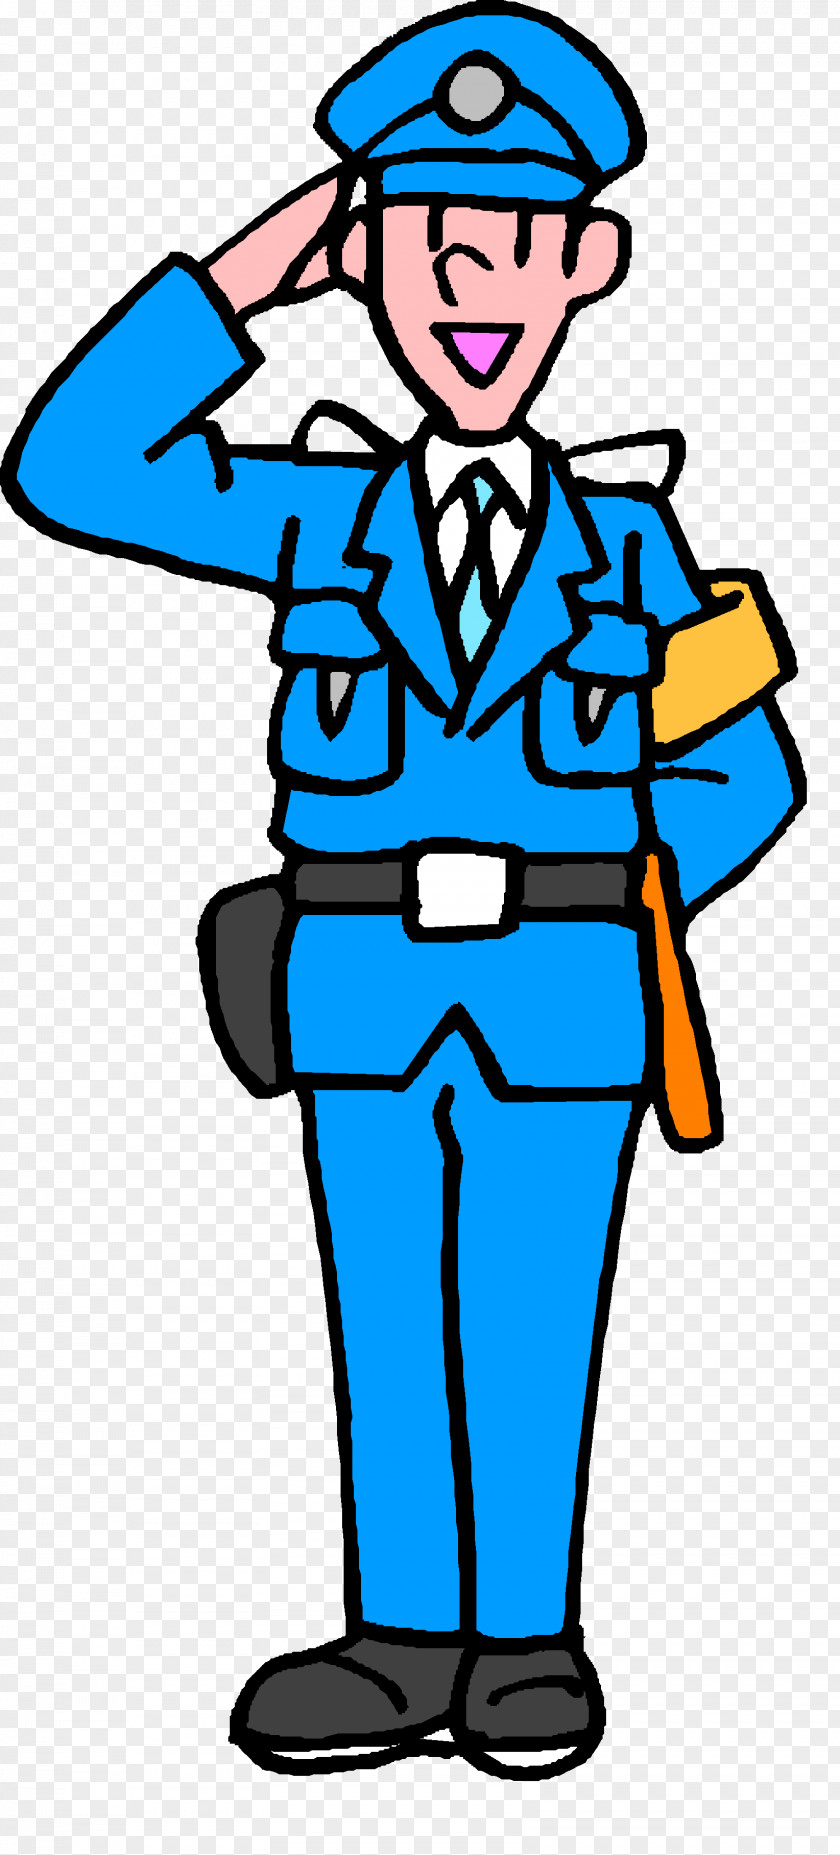 Policeman Security Guard Police Officer Crossing Clip Art PNG